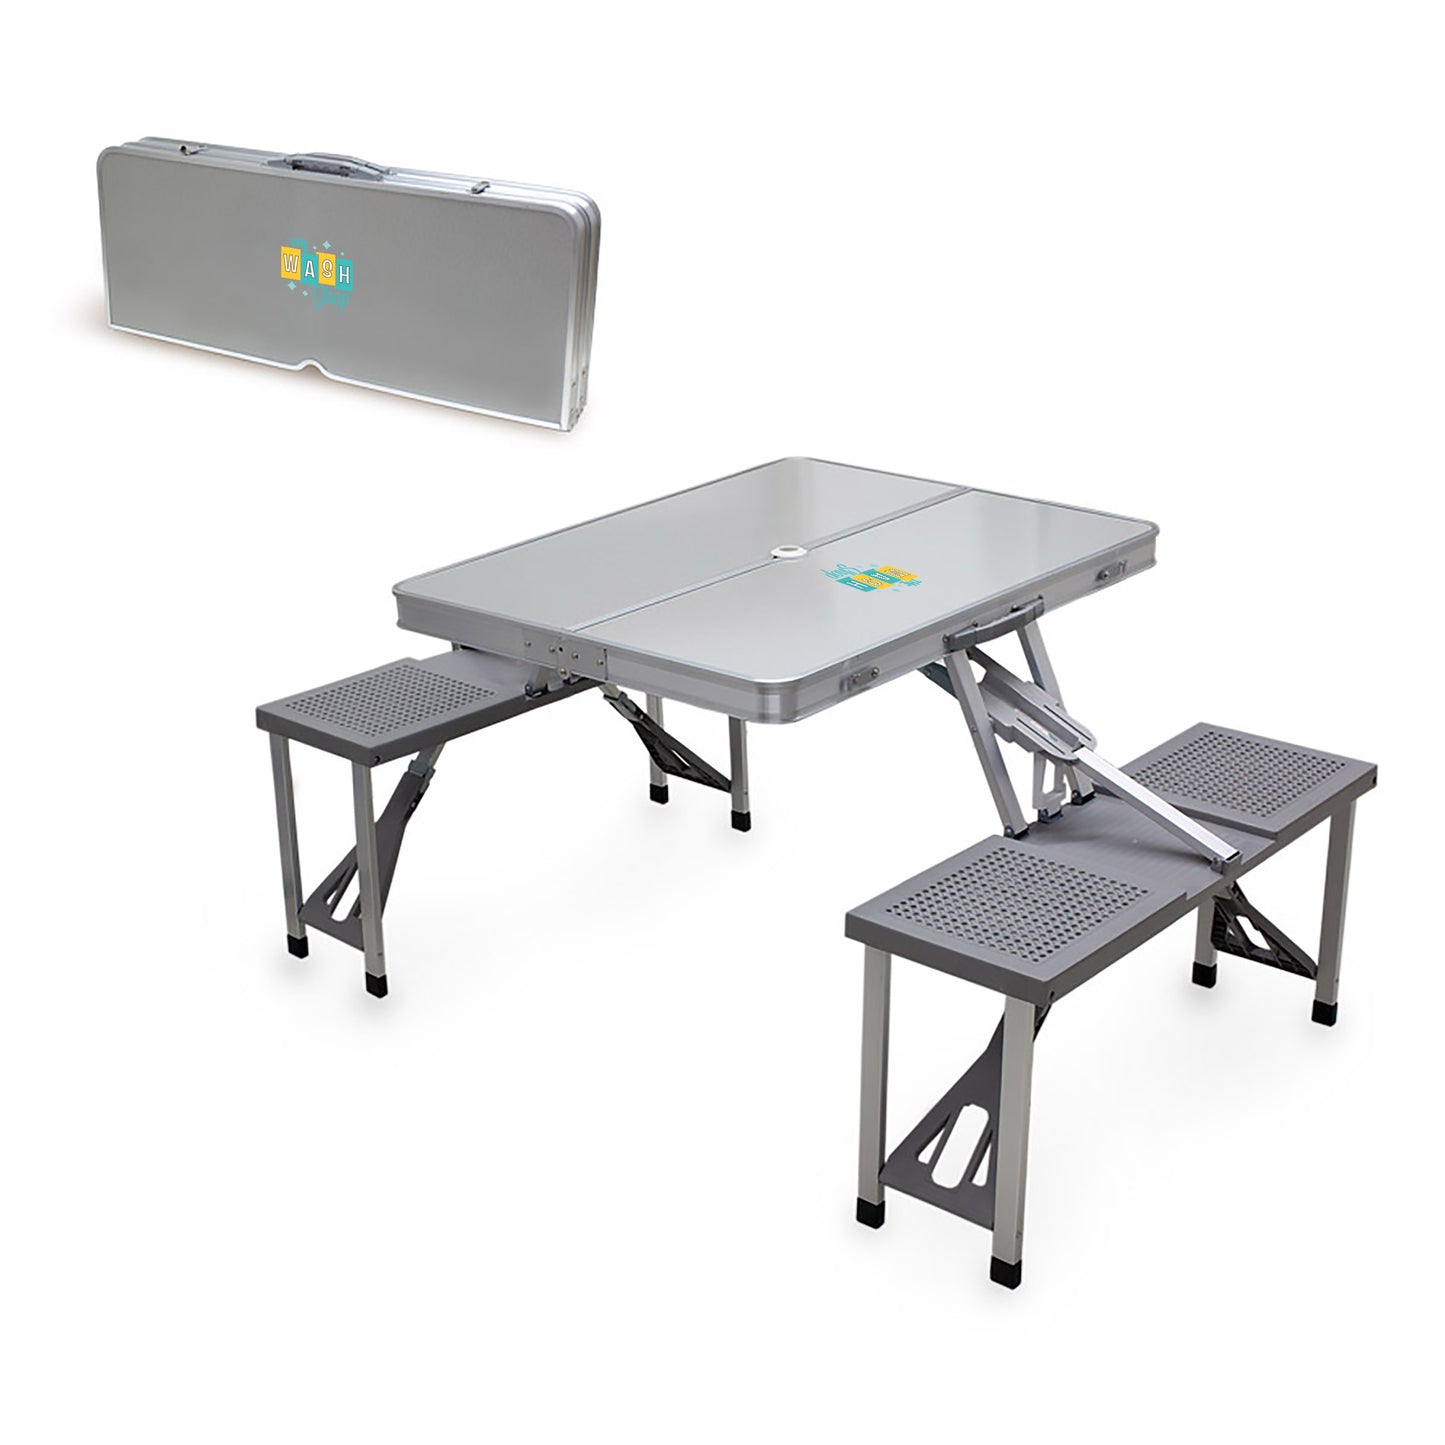 Portable Picnic Table With Seats - The Wash Shop